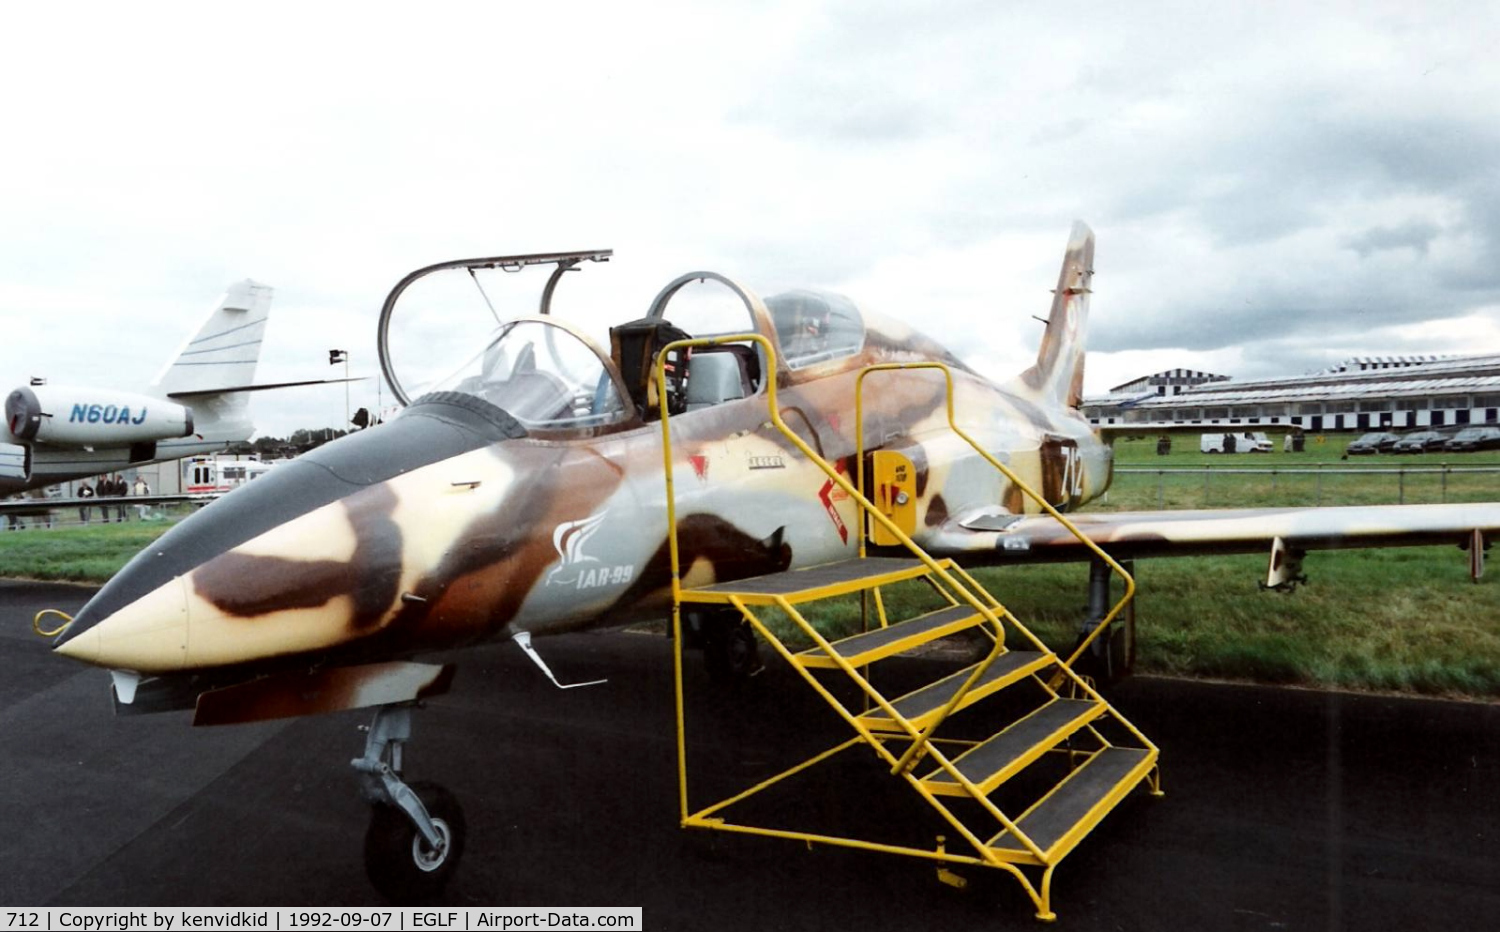 712, IAR IAR-99 Soim C/N Not found 712, On static display at the 1992 Farnborough International Air Show, scanned from slide.